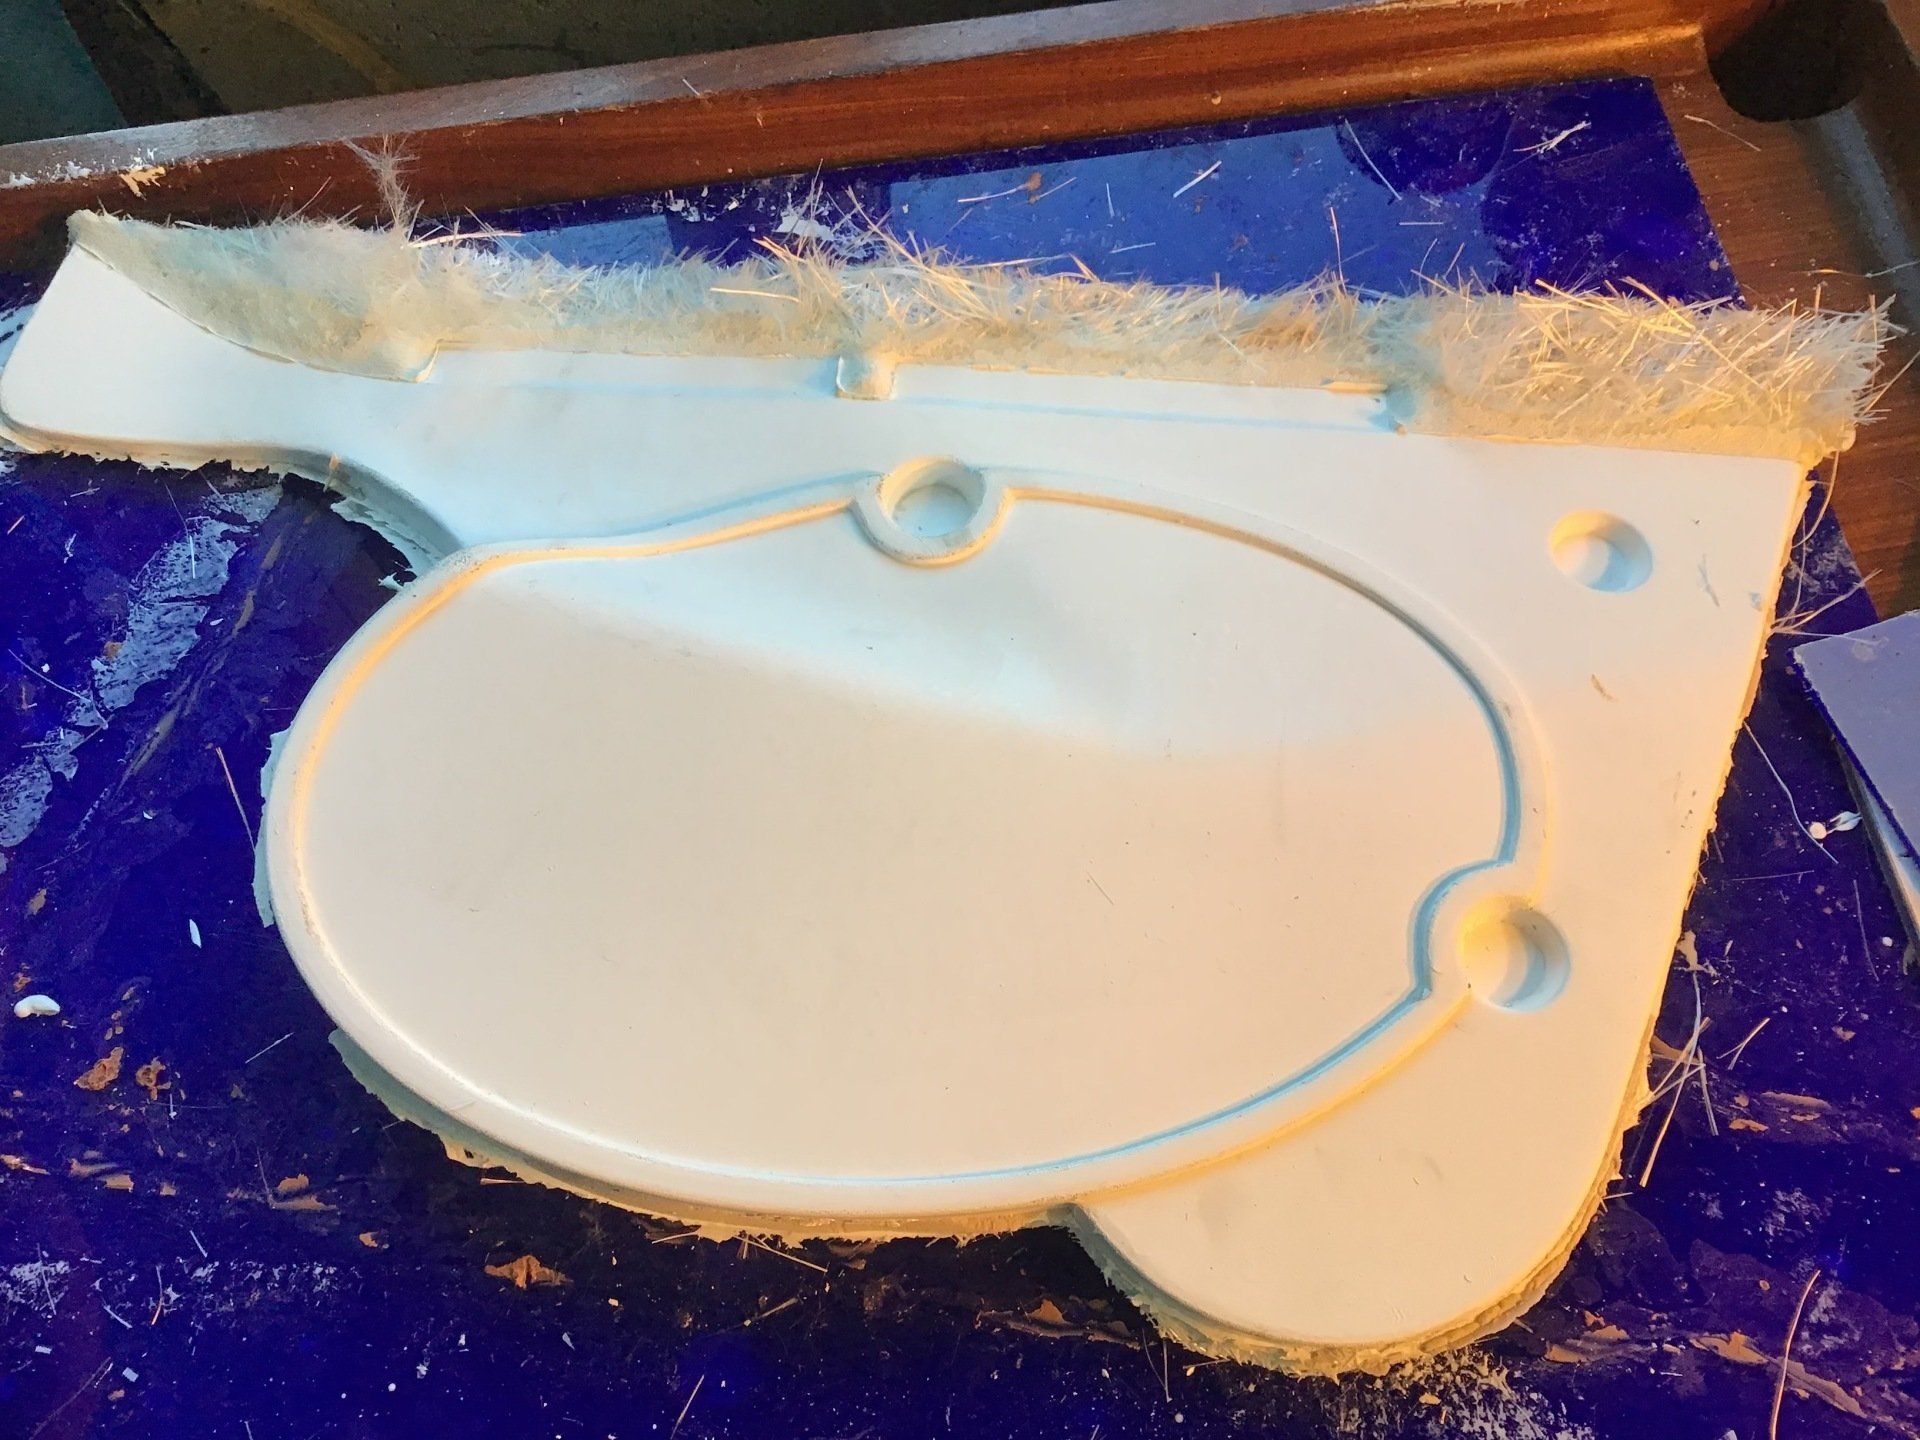 Side panel released from the mould